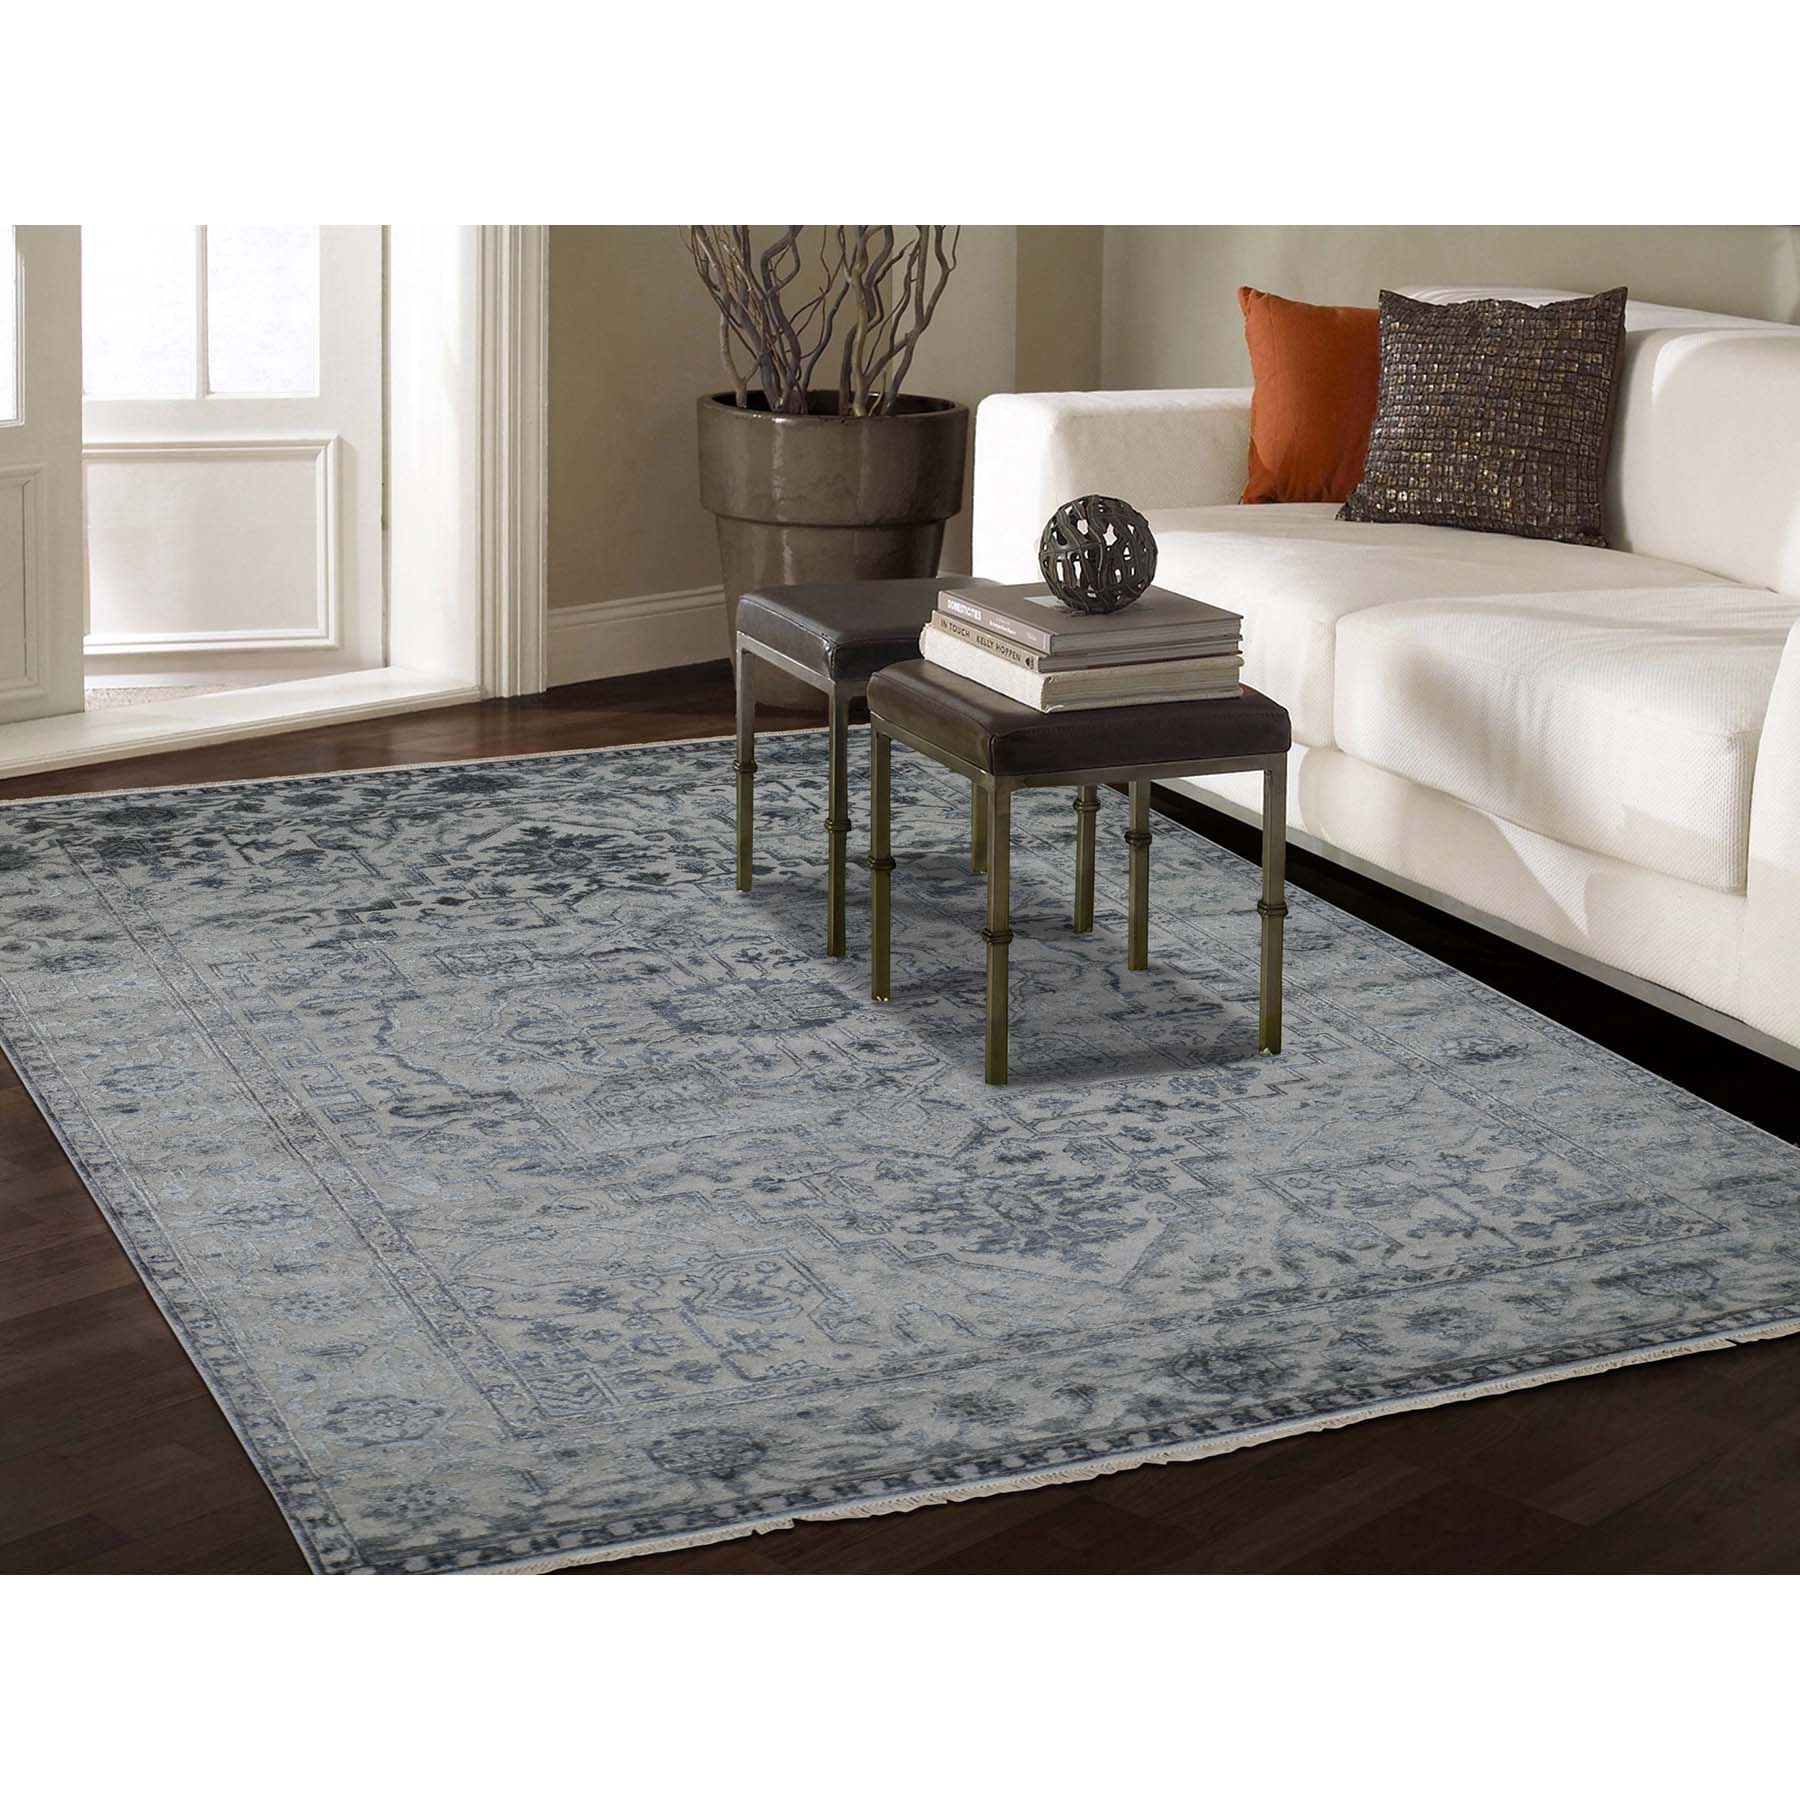 6-x9-1  Silver Heriz Design Wool And Silk Hi-lo Pile Hand-Knotted Oriental Rug 